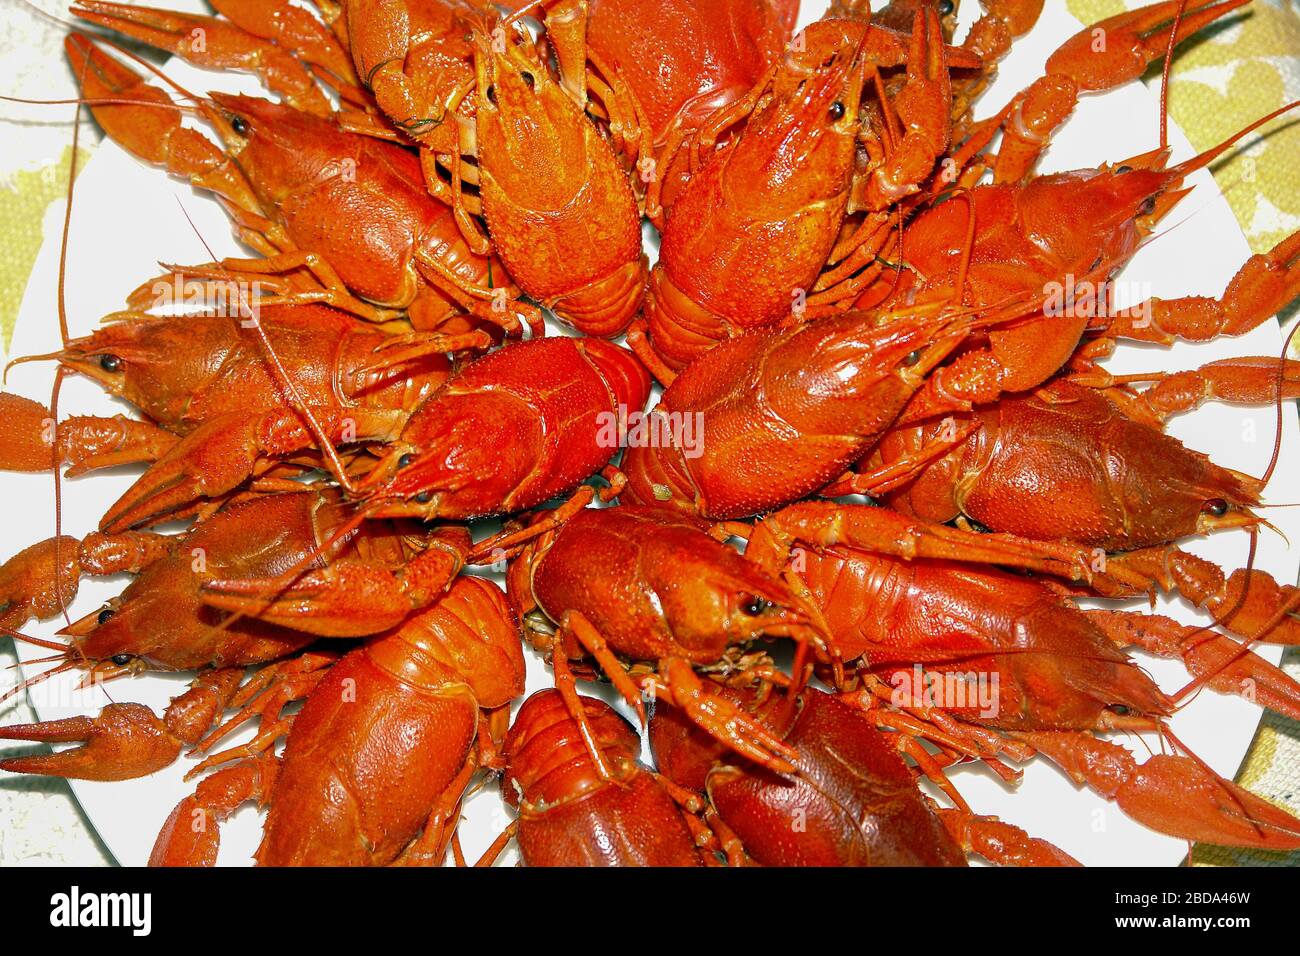 Boiled freshwater red crayfish on a plate Stock Photo